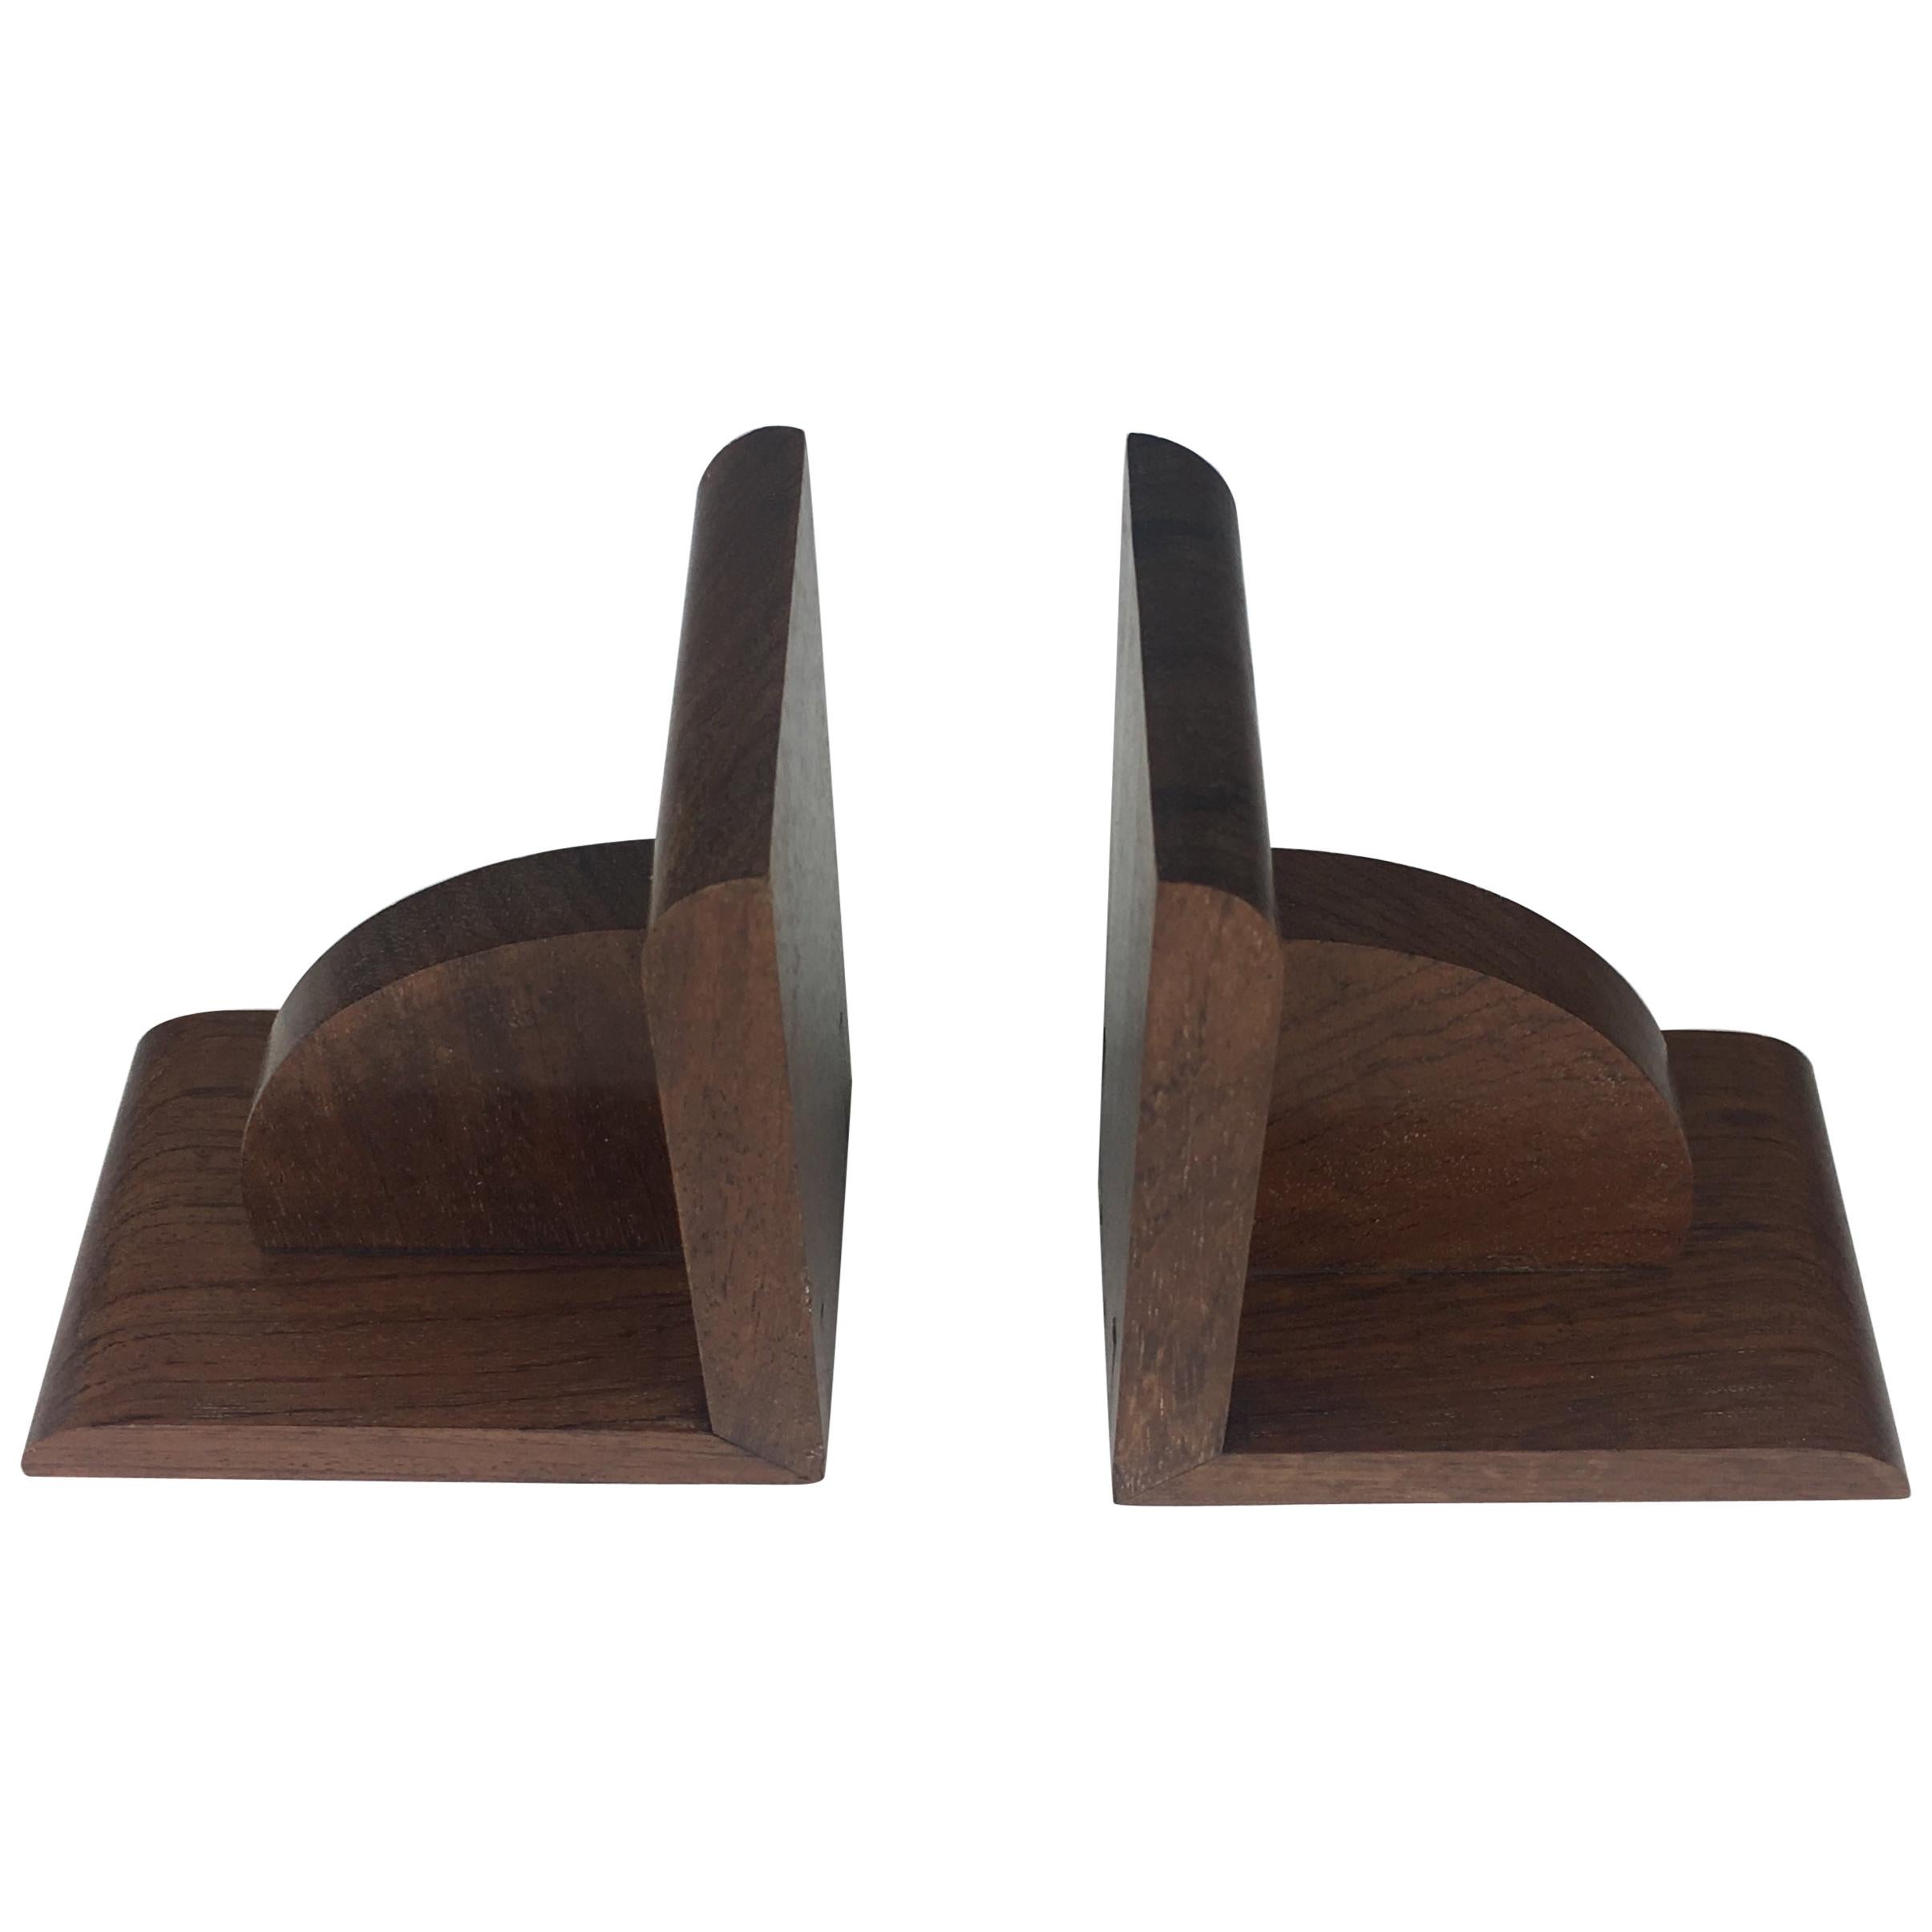 Pair of French Art Deco Era, Wooden Bookends